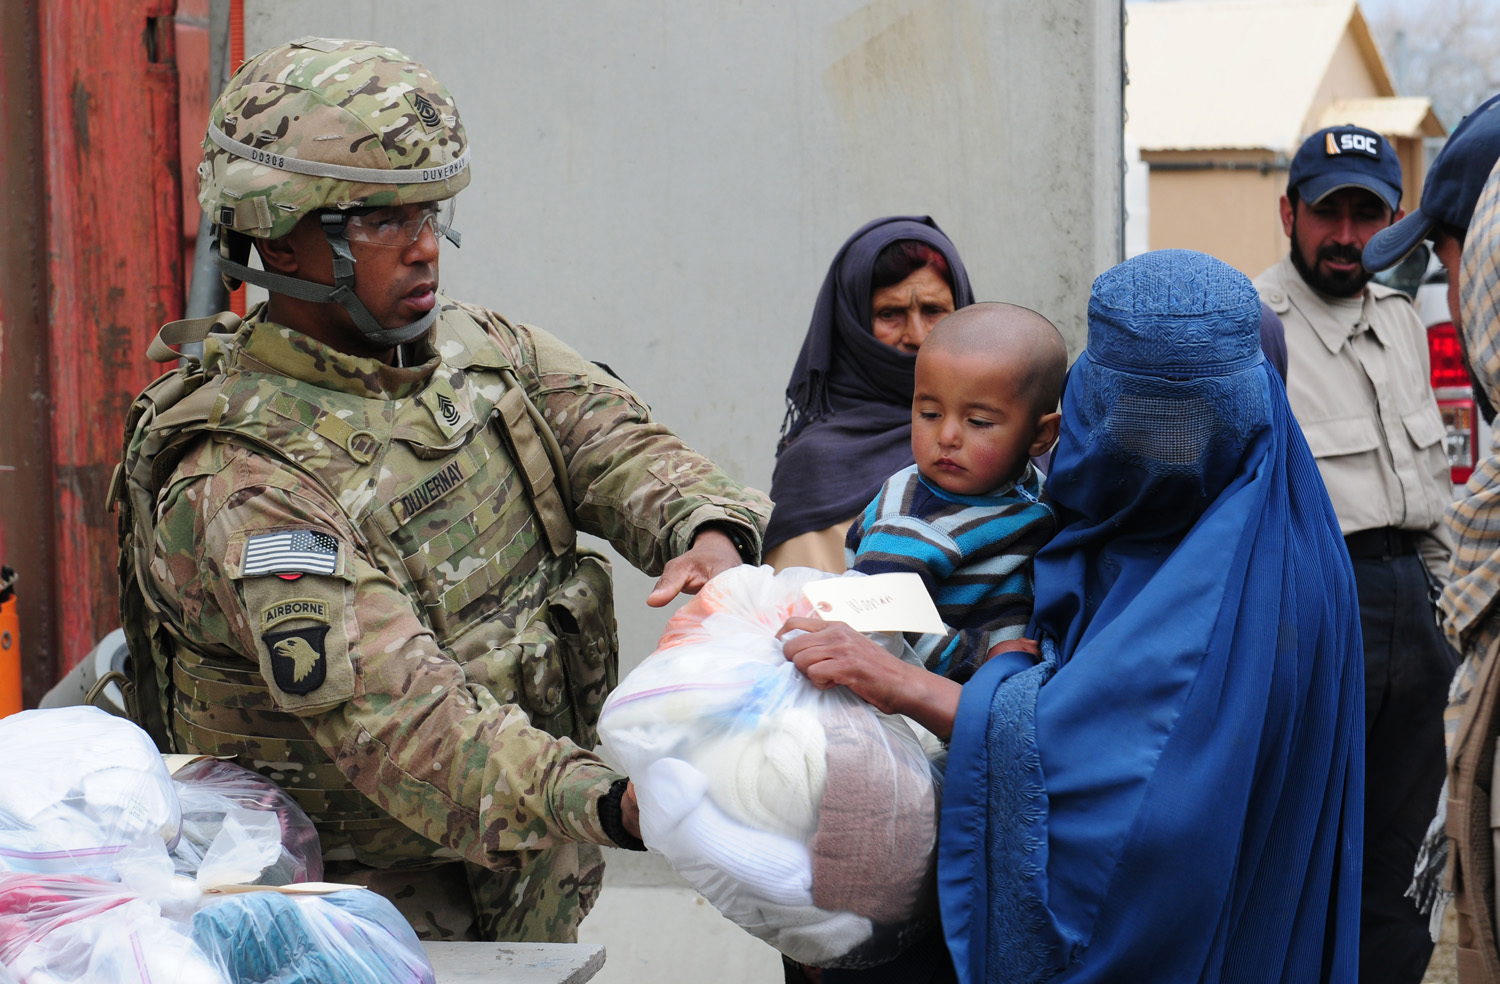 A US soldier distributing clothing at El Salam Egyptian Field Hospital, Bagram Air Field, Afghanistan, March 2012